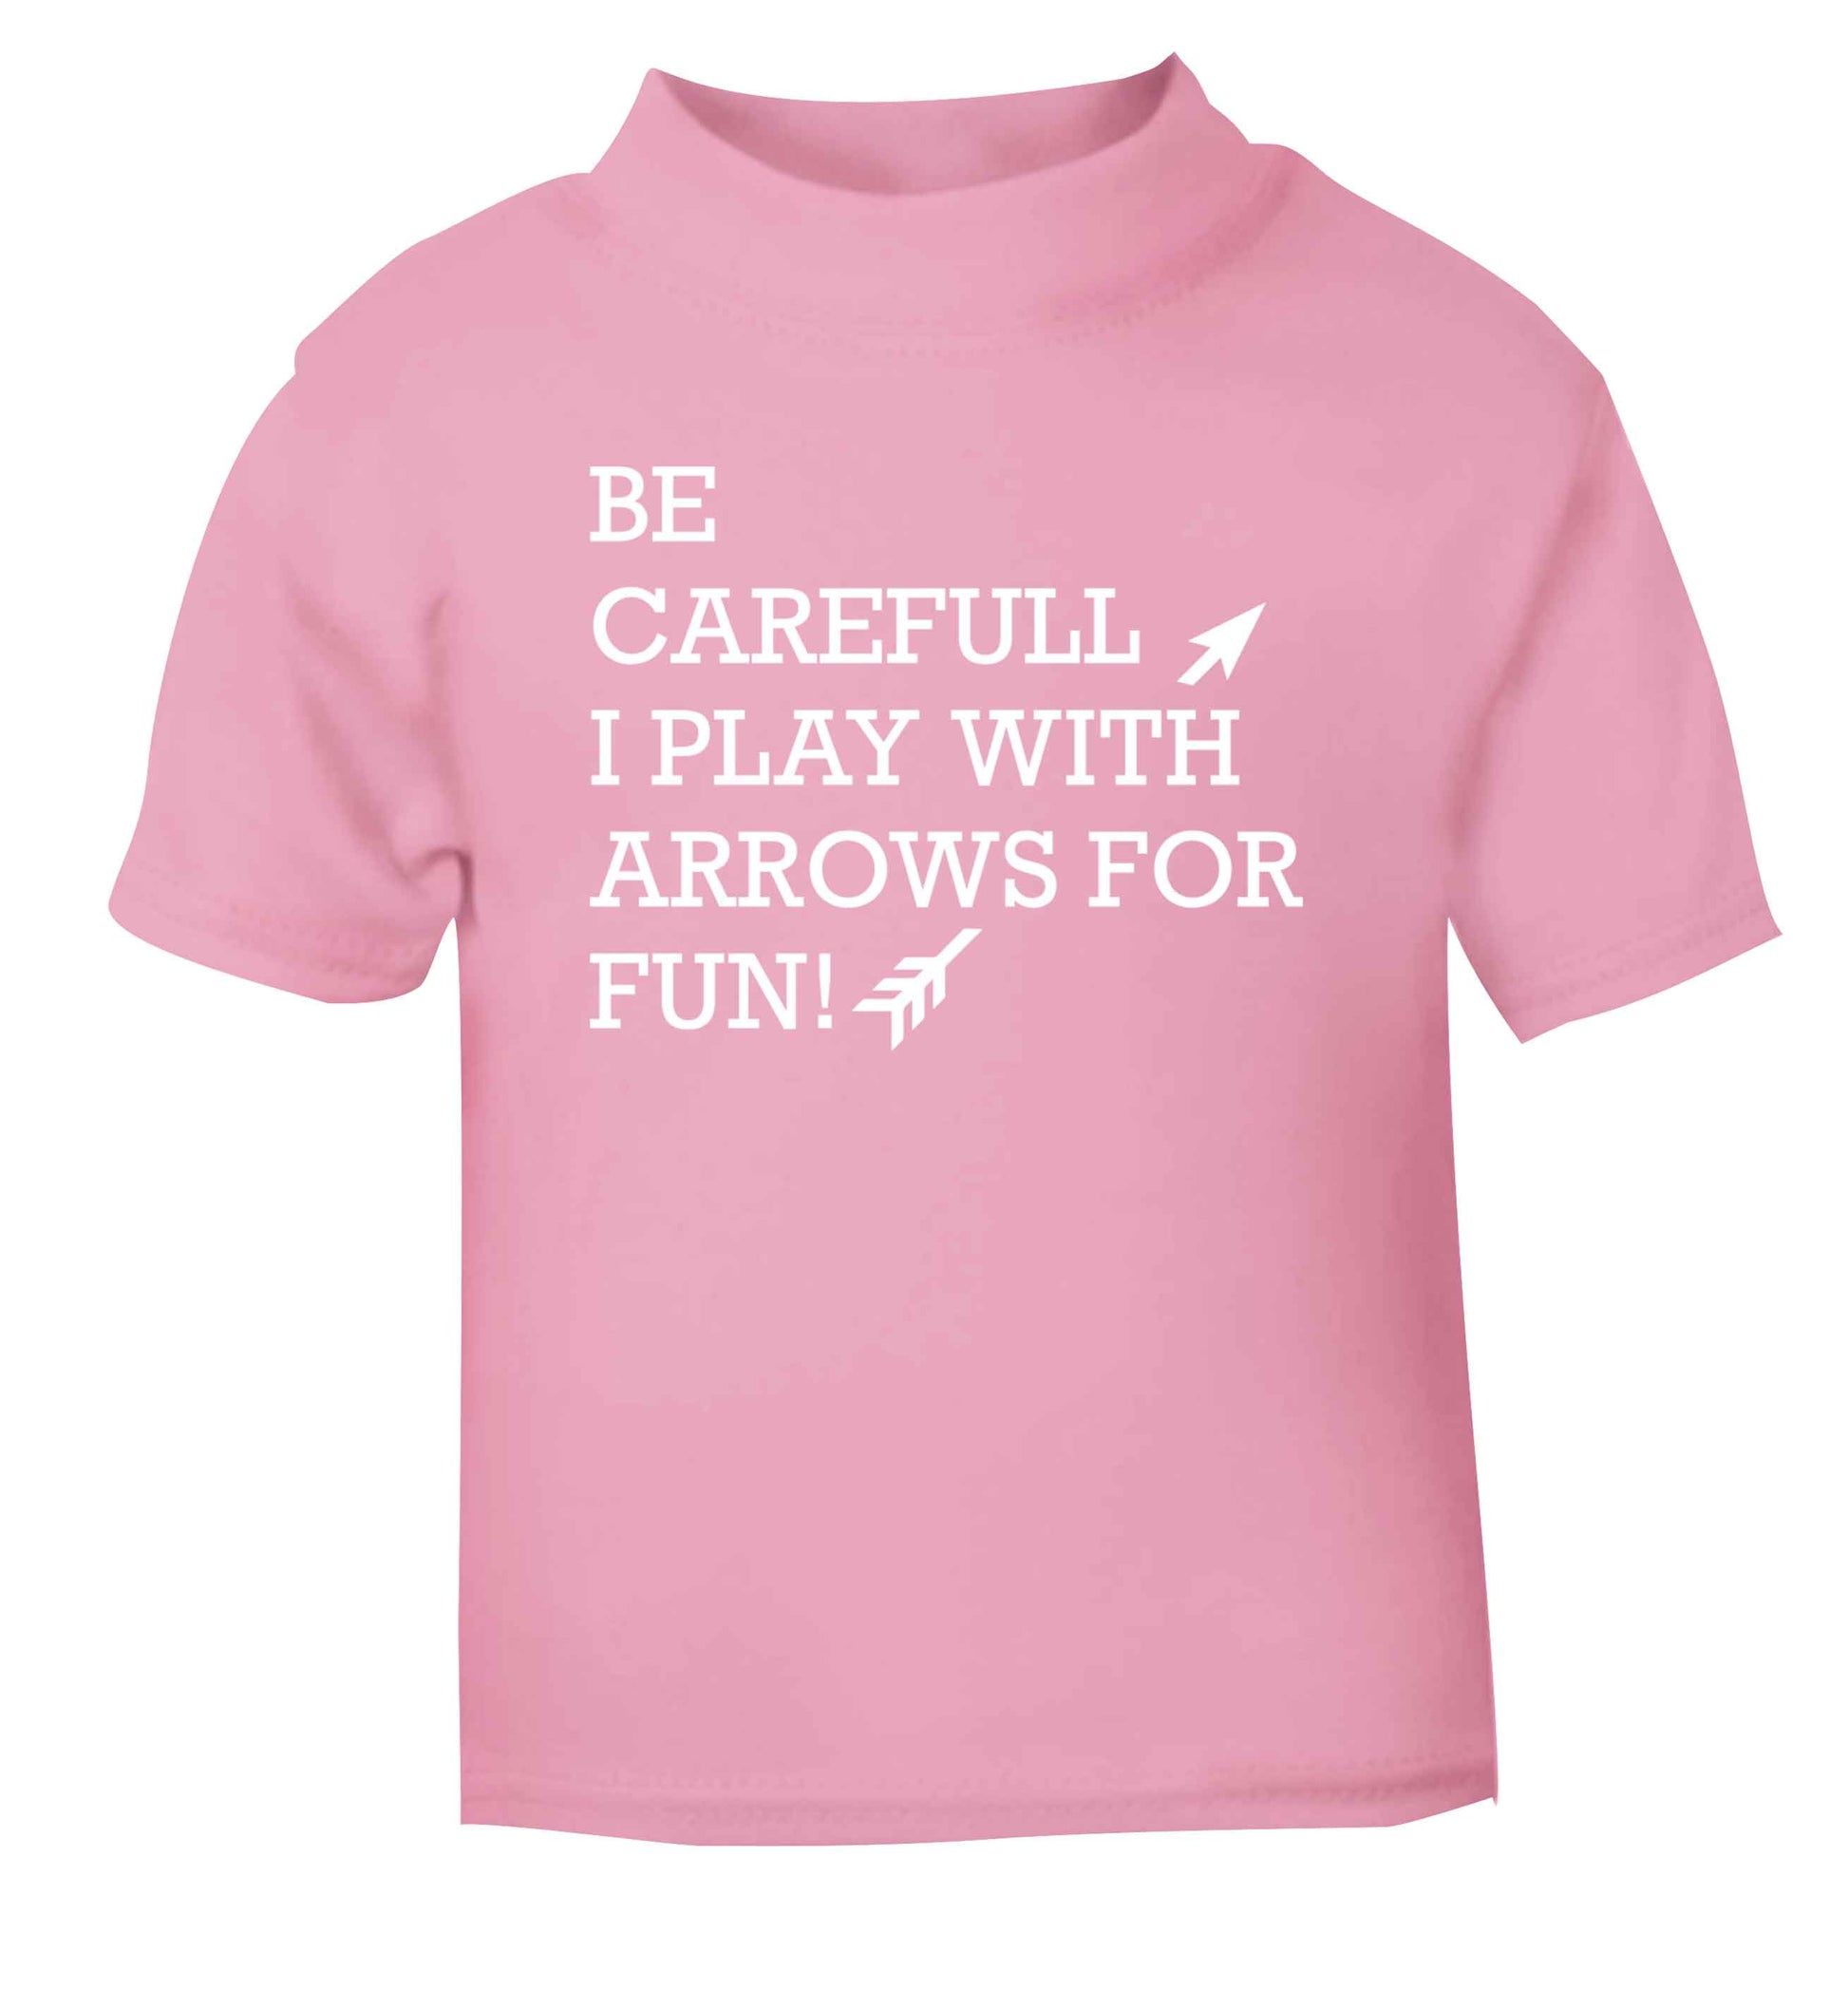 Be carefull I play with arrows for fun light pink Baby Toddler Tshirt 2 Years